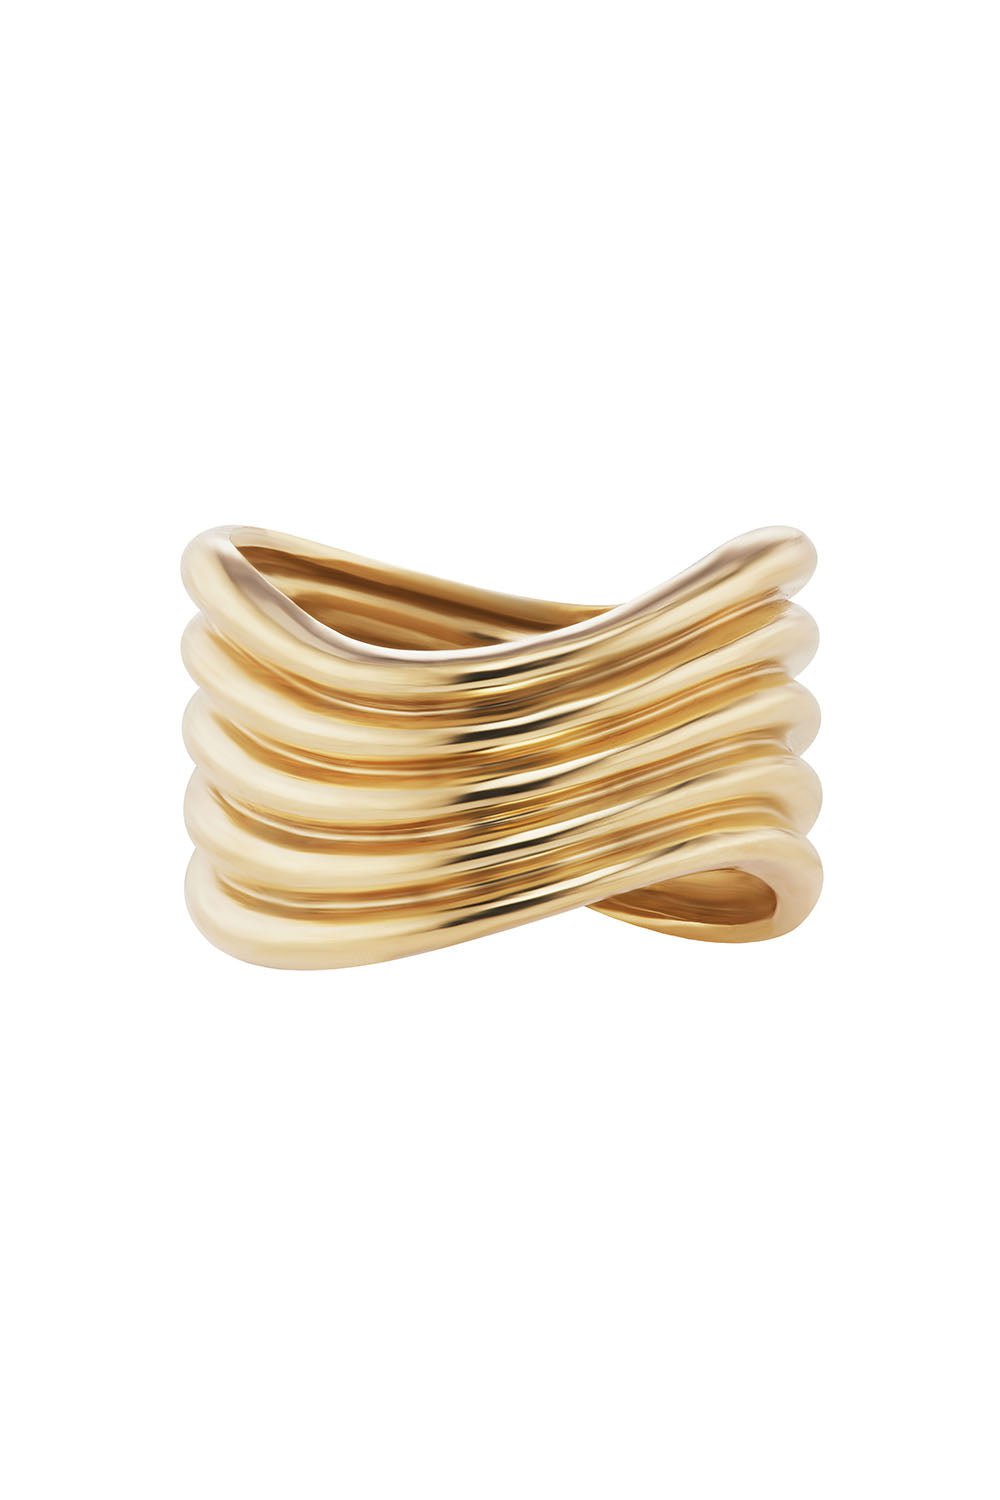 BECK JEWELS-La Ola Five Tiered Wave Ring-YELLOW GOLD